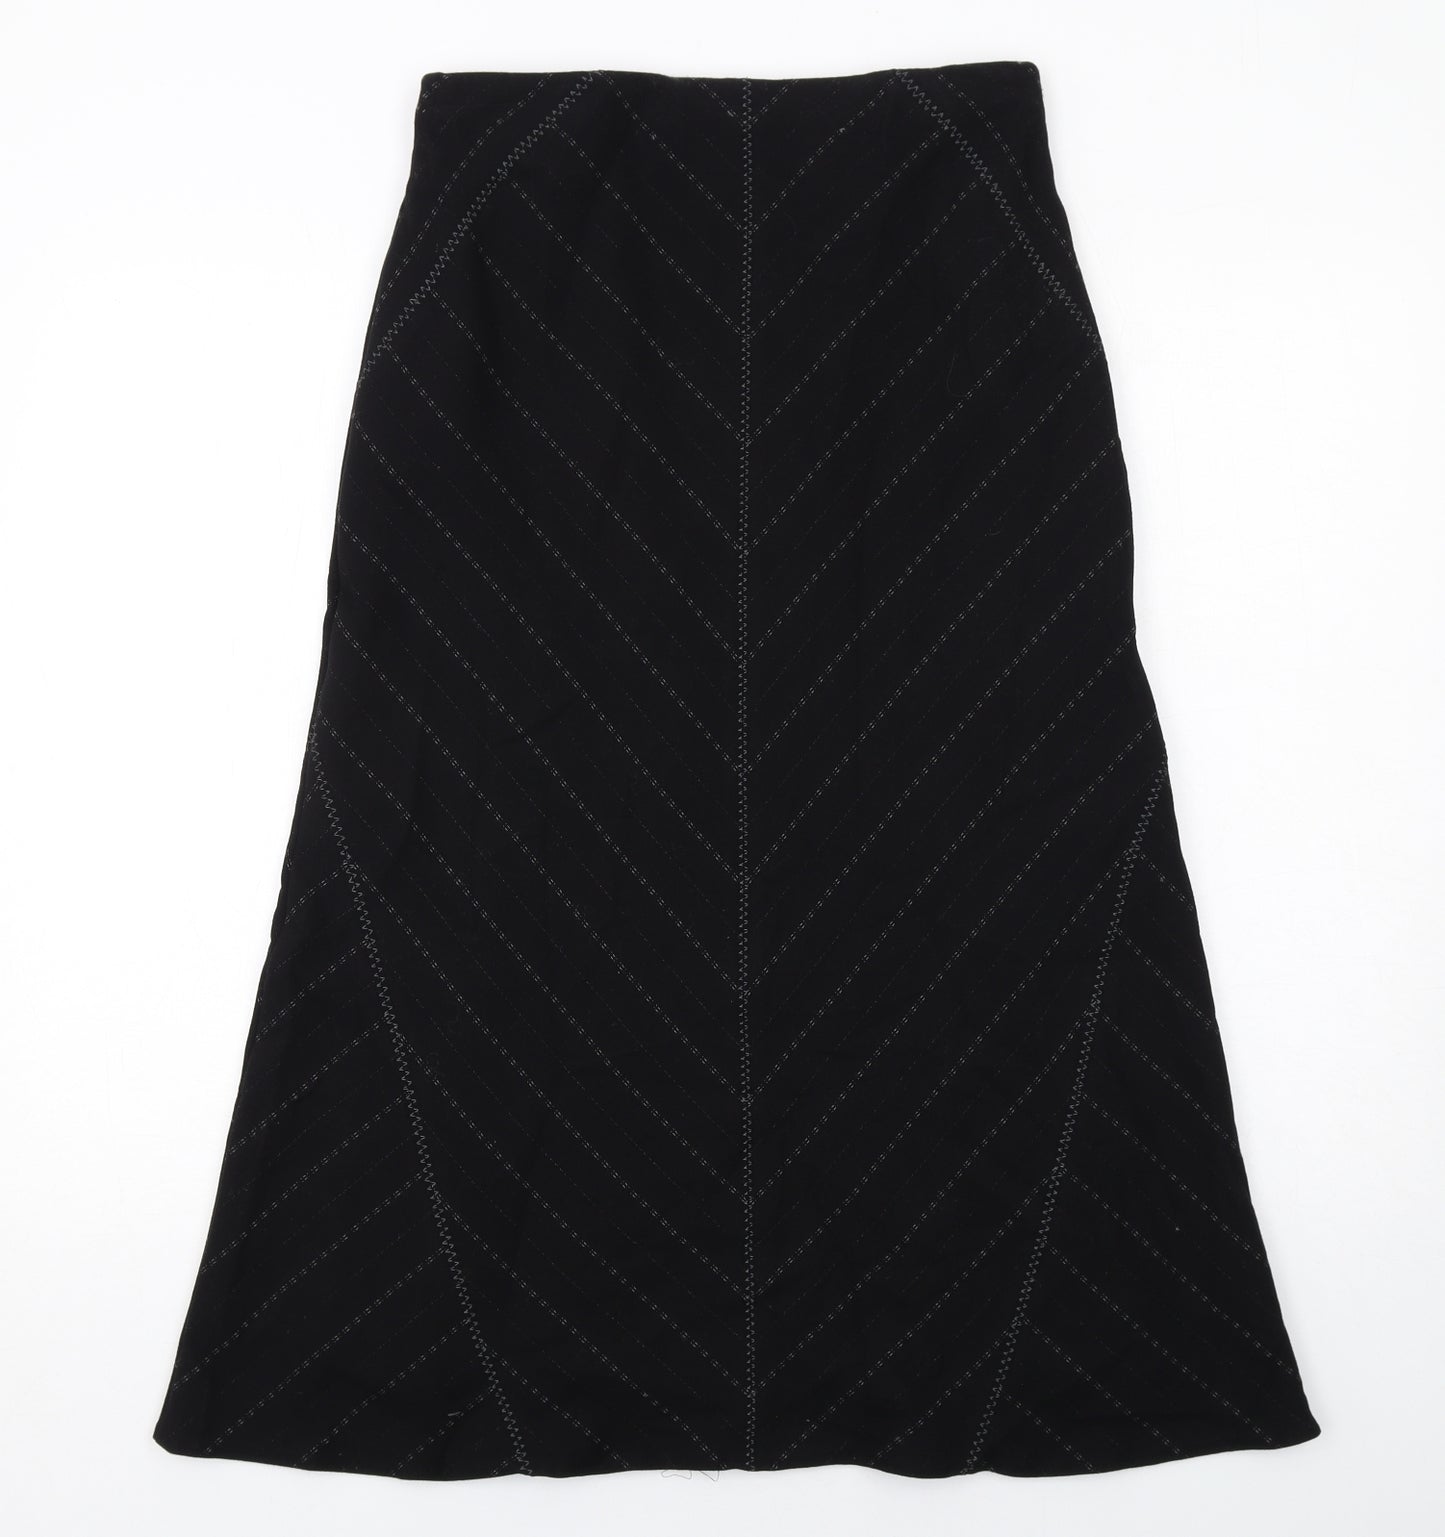 Marks and Spencer Womens Black Striped Polyester Swing Skirt Size 10